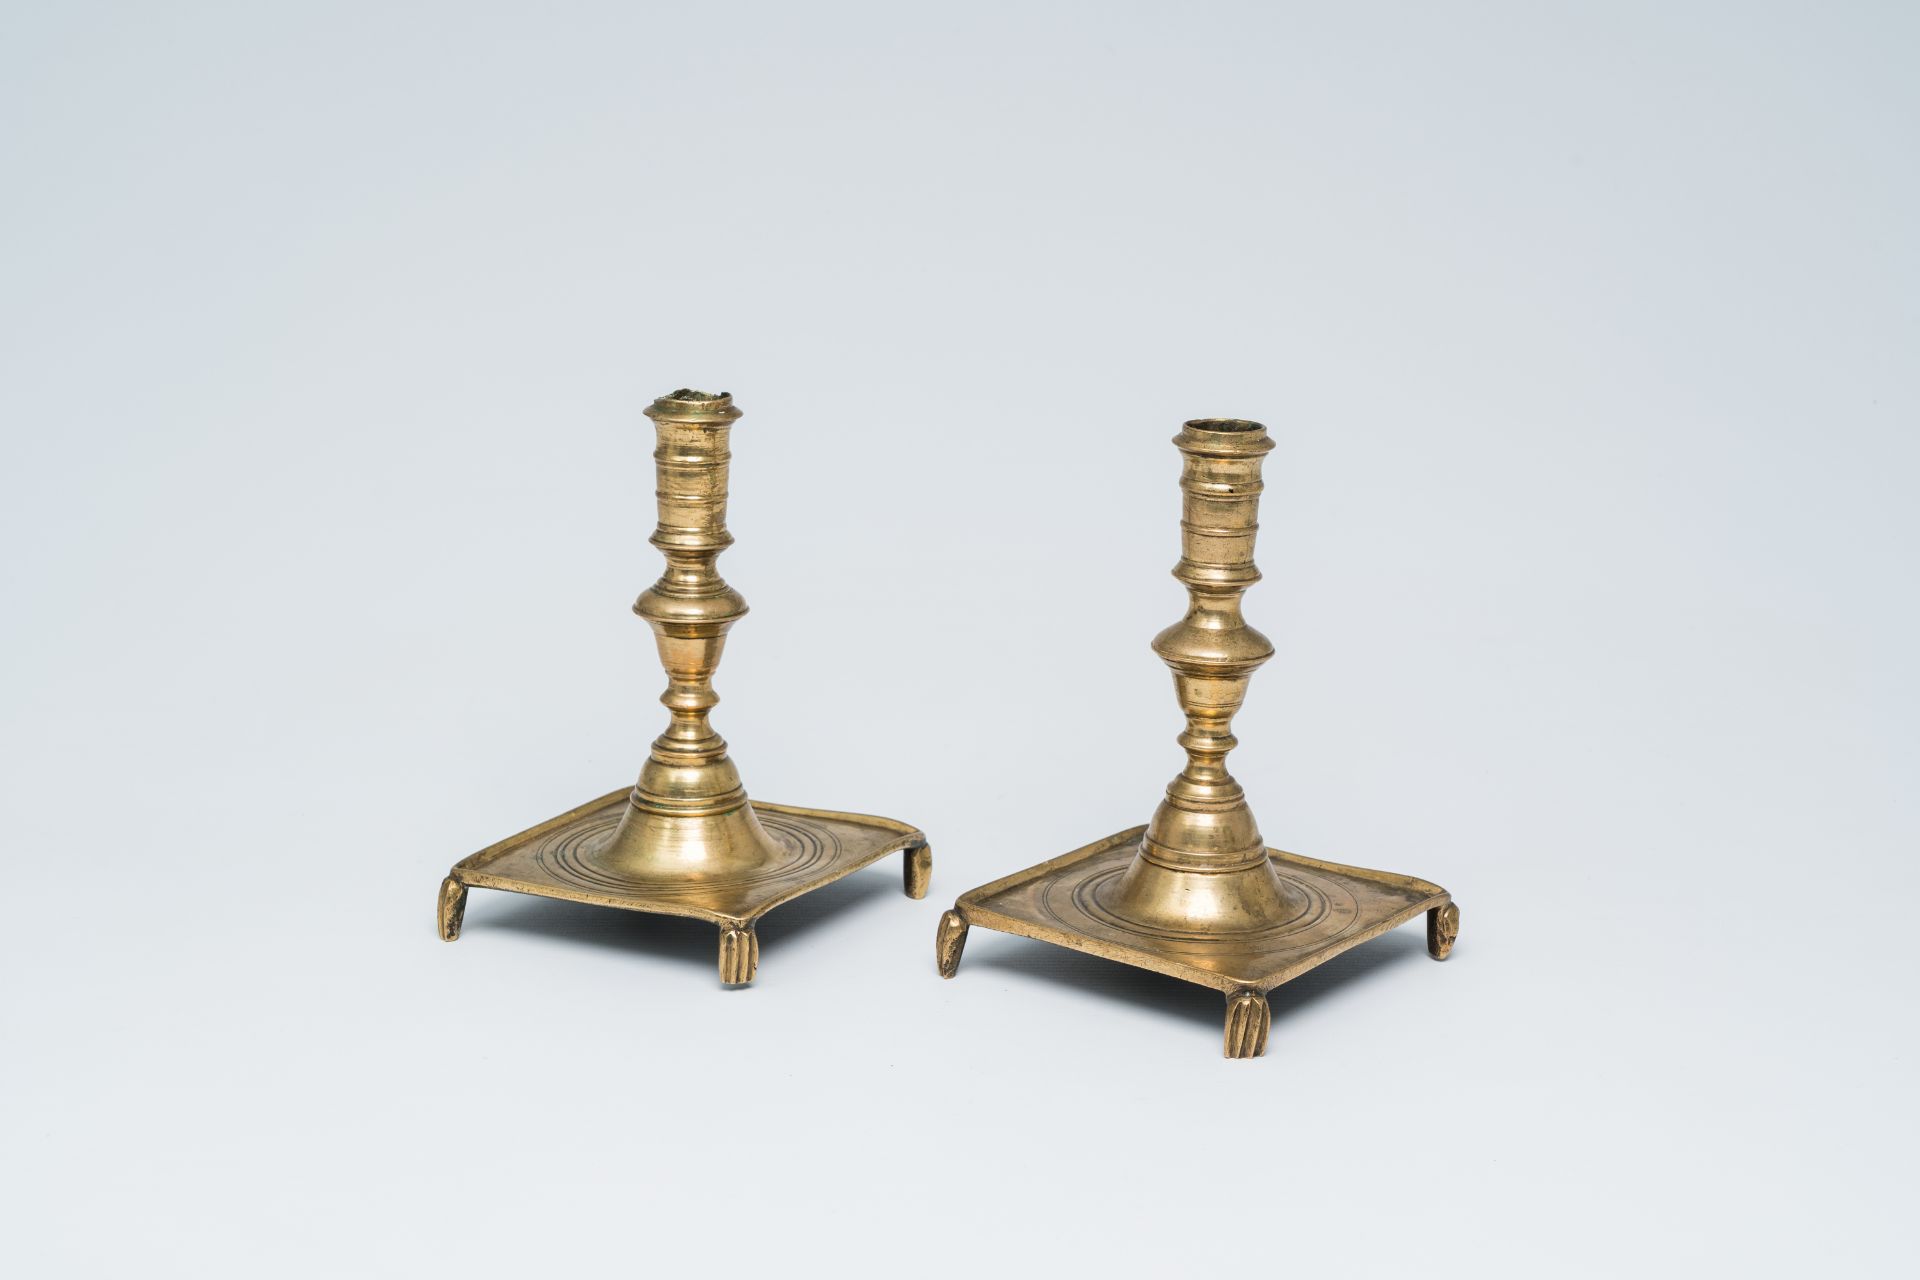 A pair of Spanish brass candlesticks, 17th/18th C.